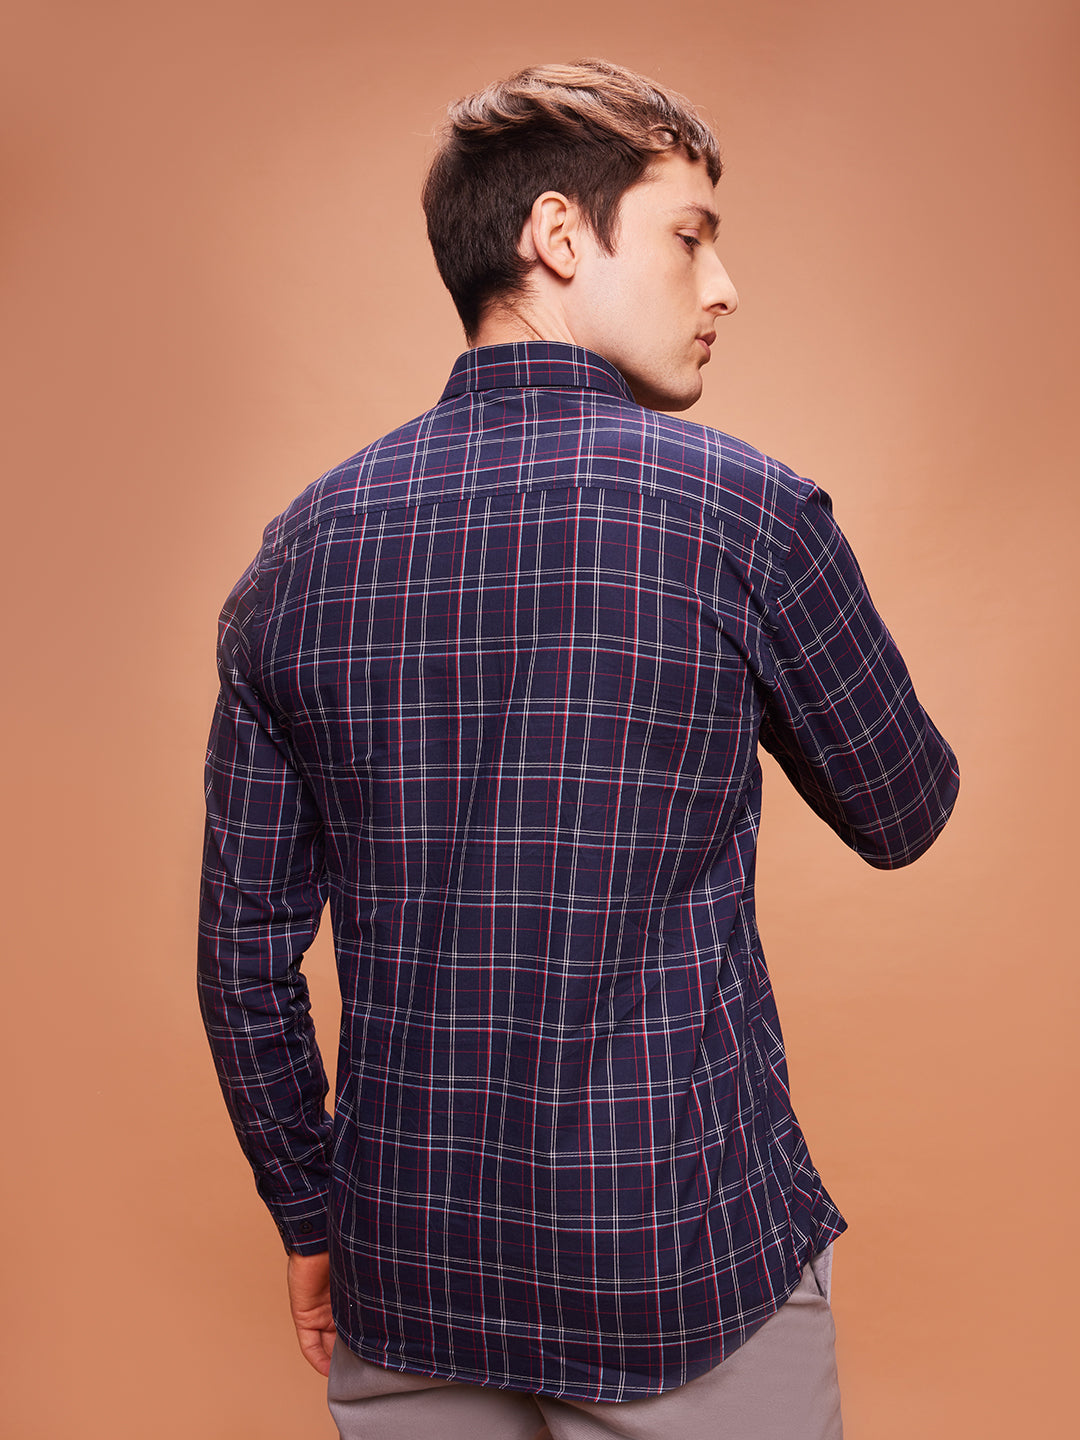 Bombay High Men's Chequered Electric Blue Shirt